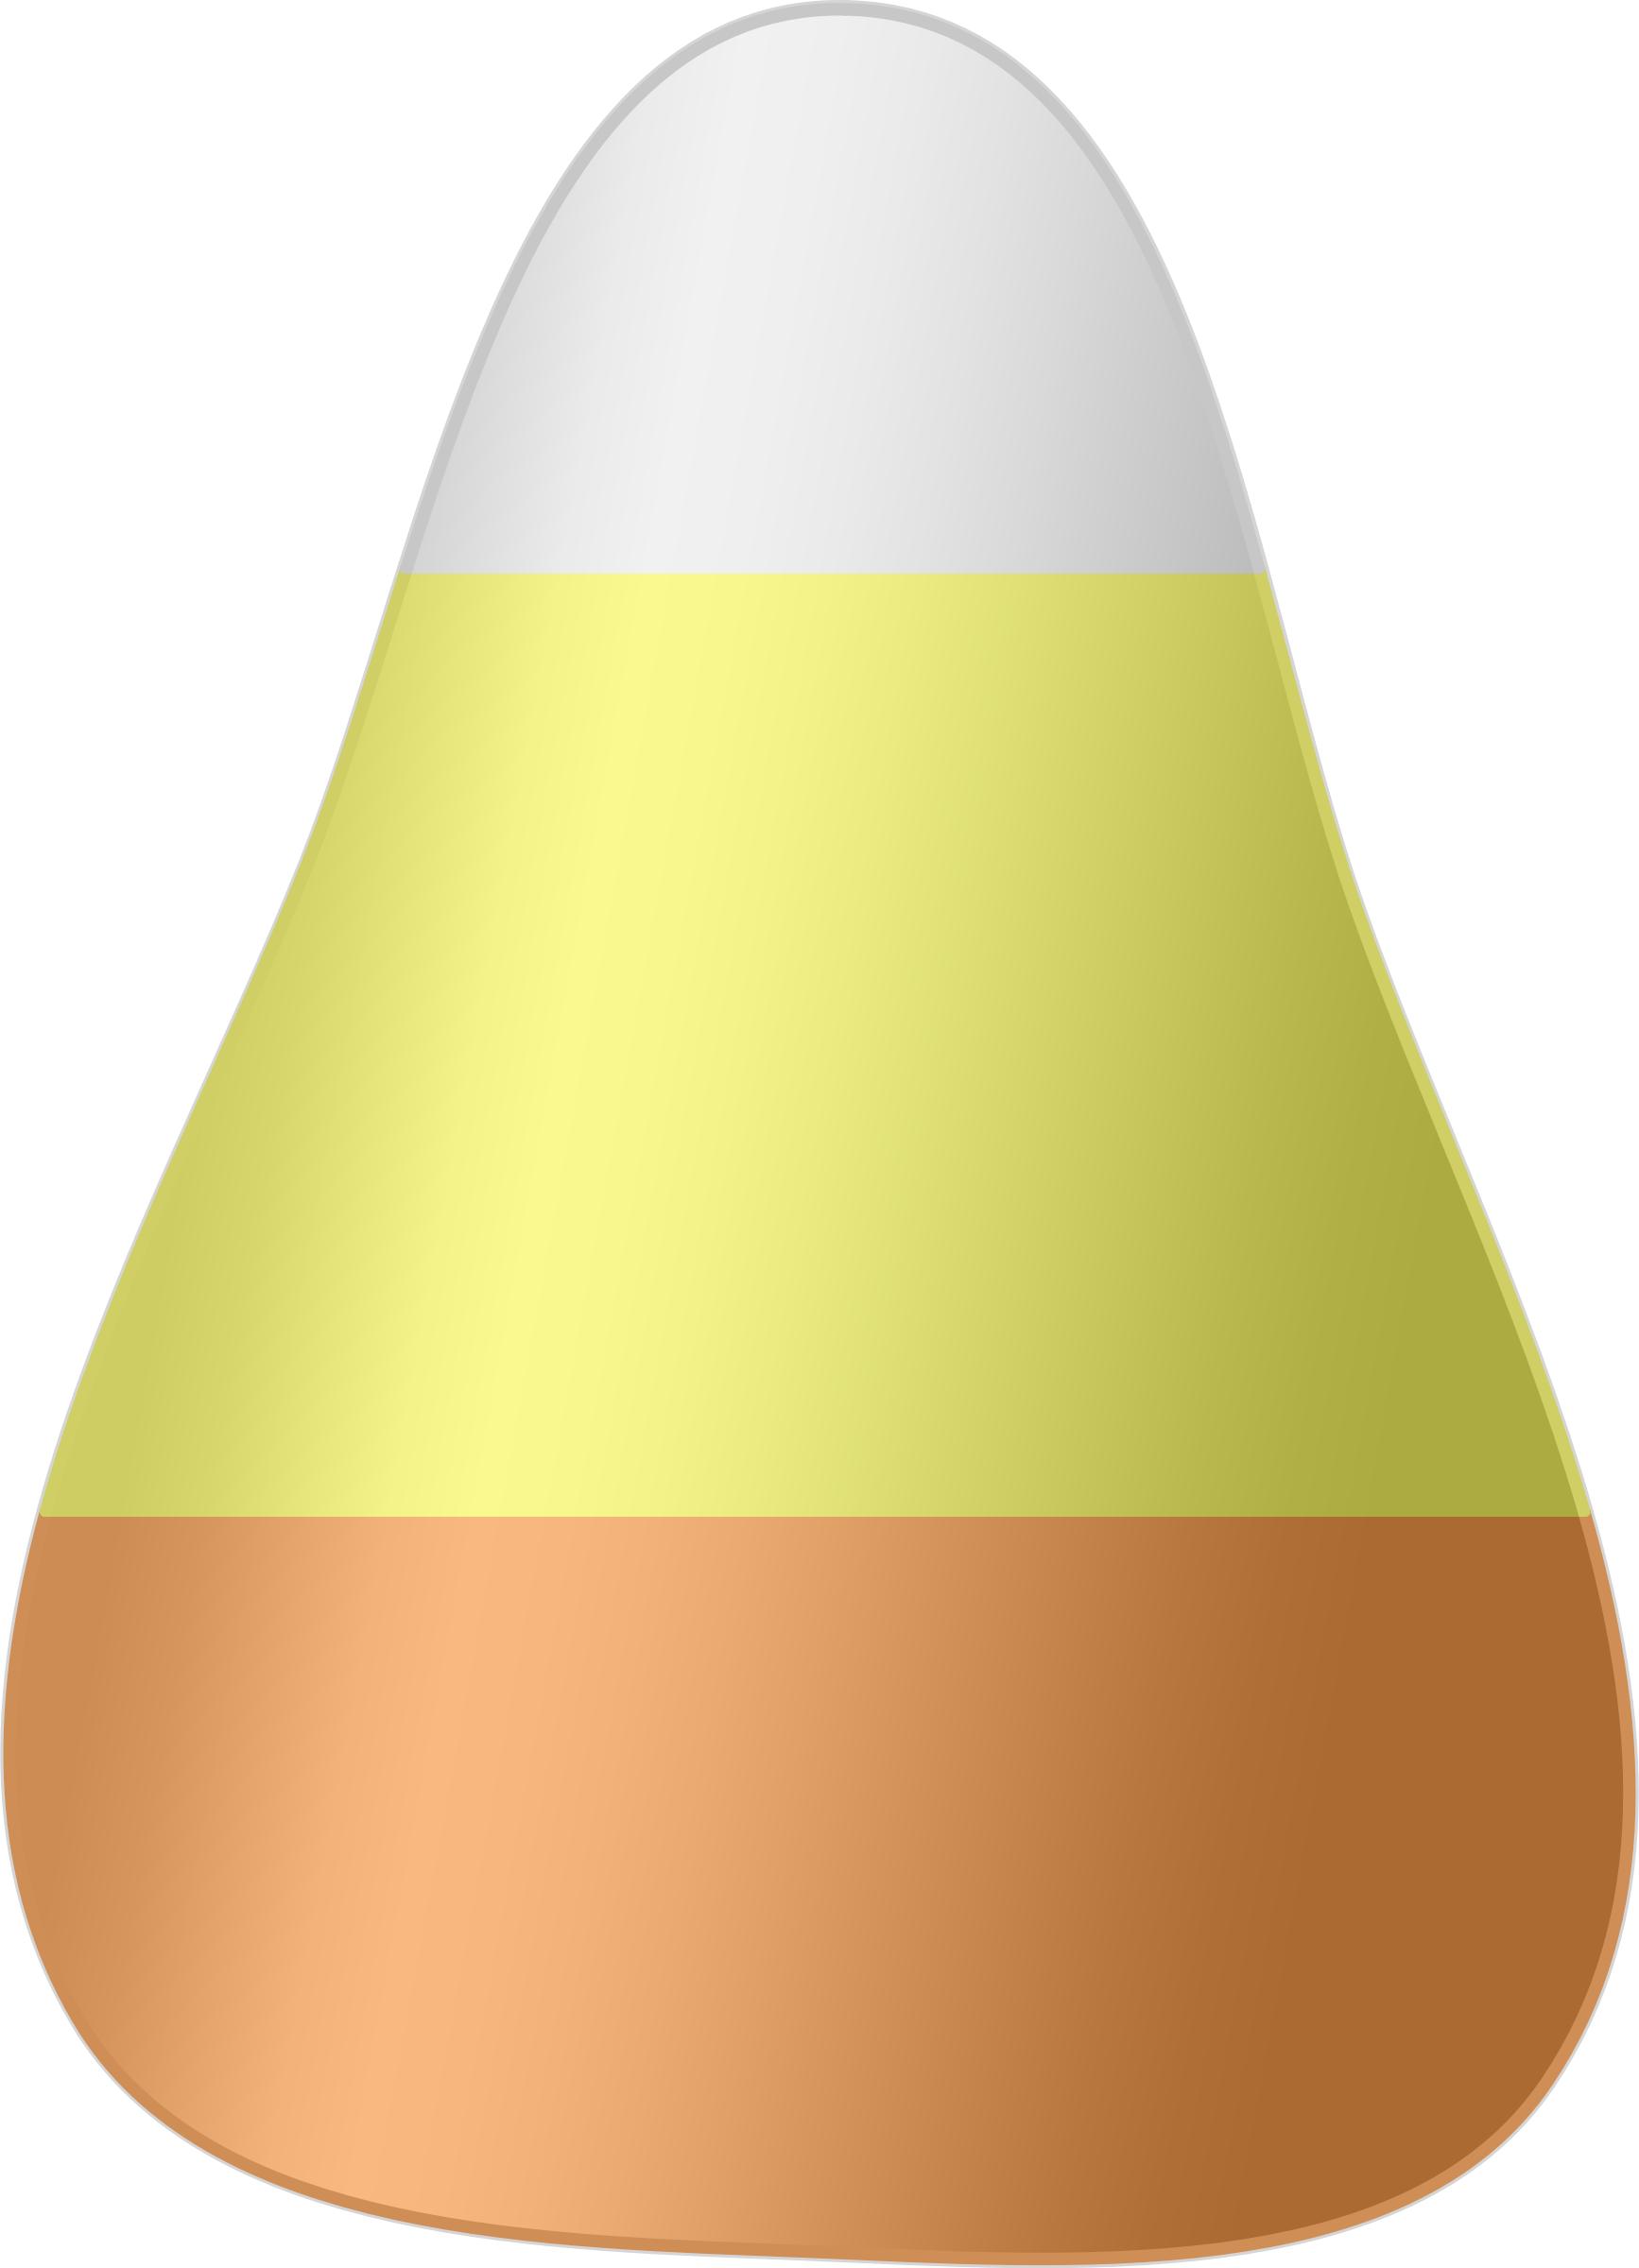 Candy Corn png